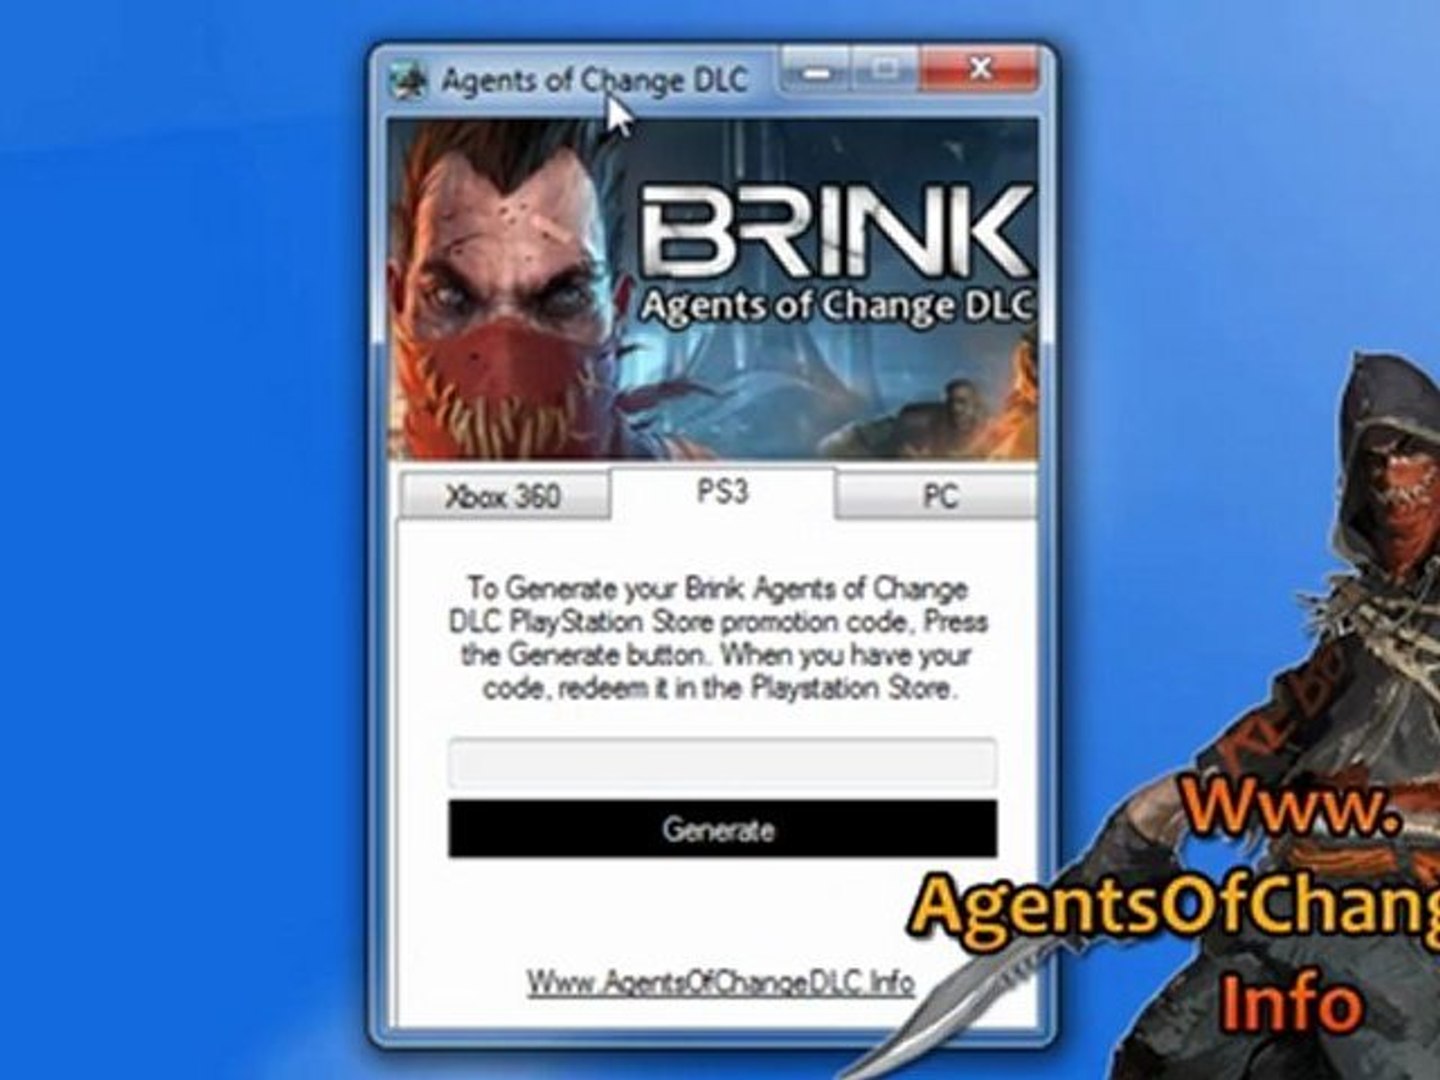 Brink Agents of Change DLC Code Free Download - video Dailymotion